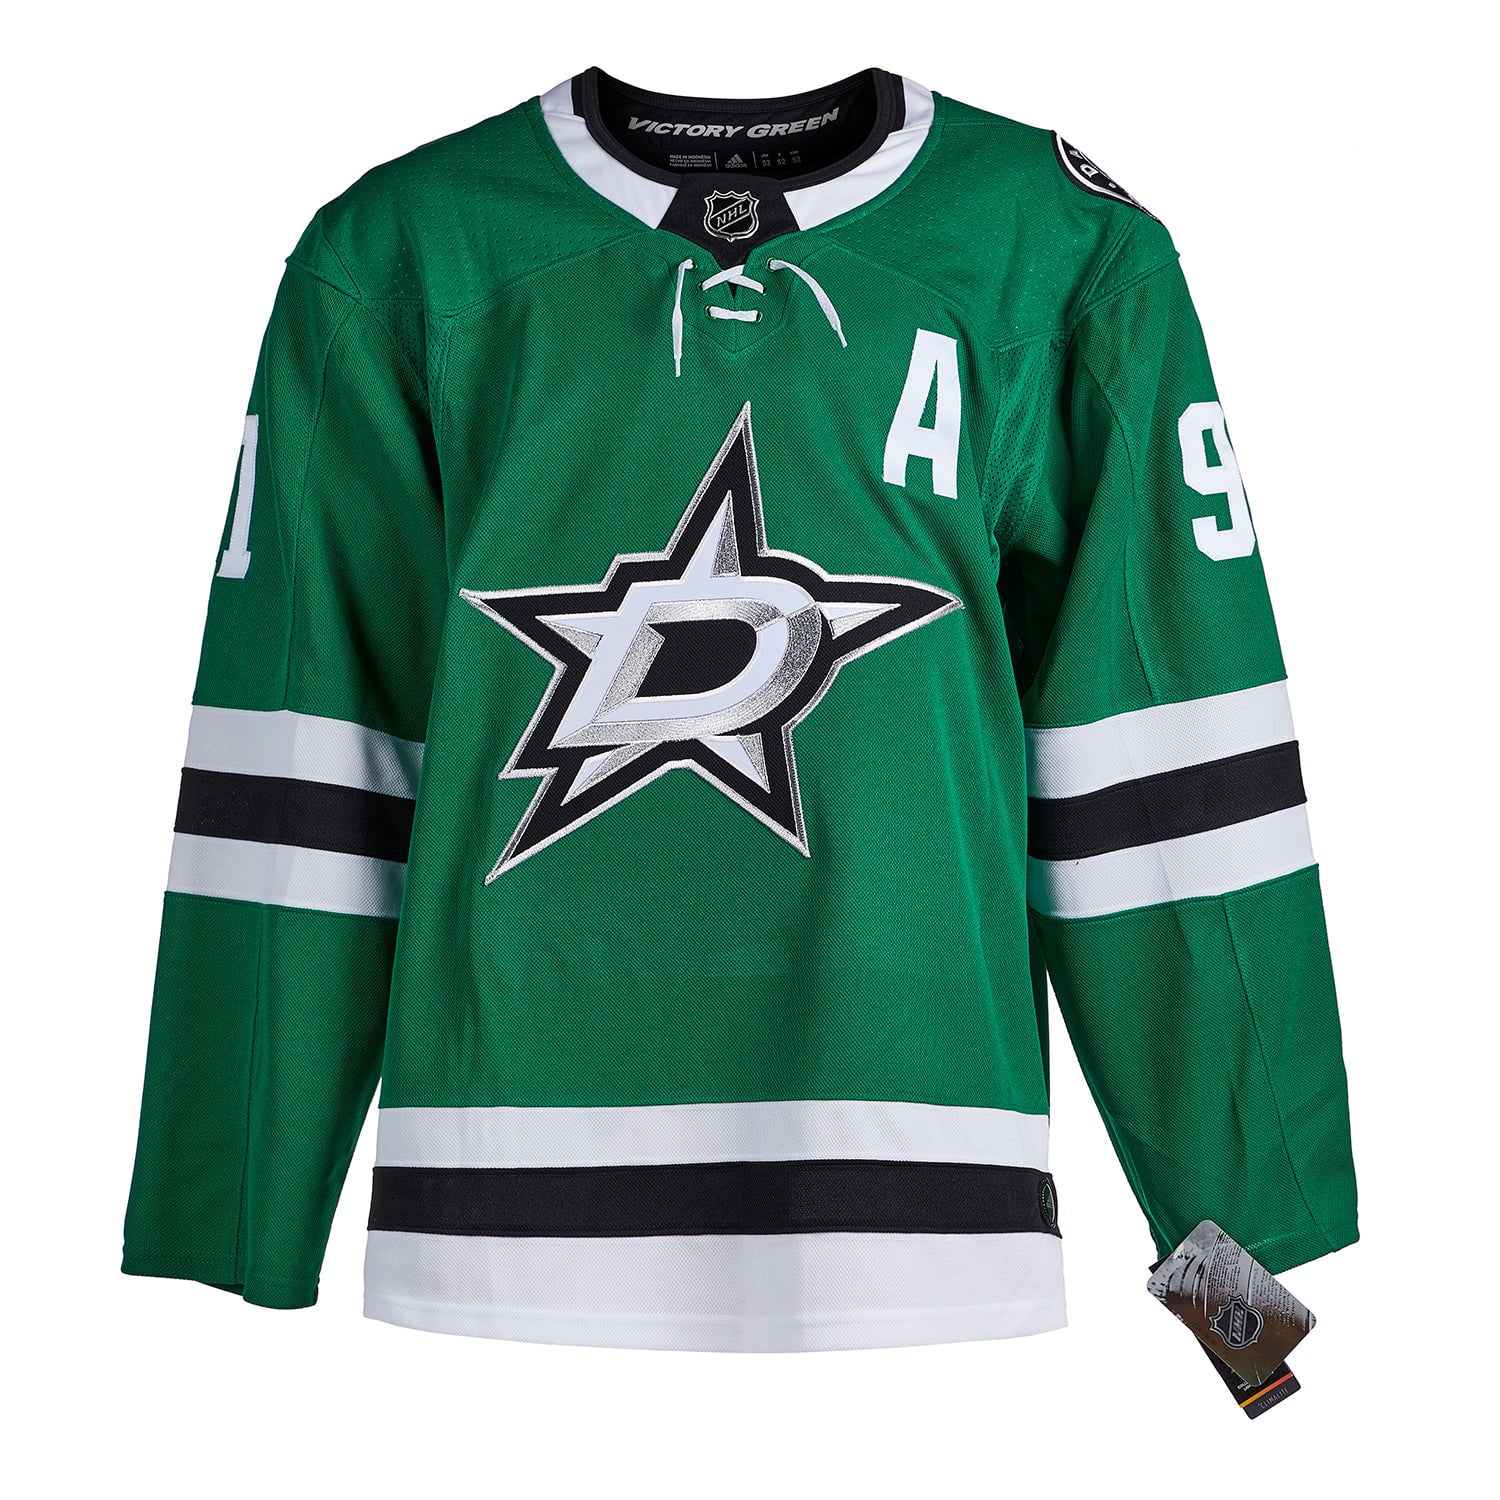 Tyler Seguin Dallas Stars Autographed Green Adidas Authentic Jersey -  Autographed NHL Jerseys at 's Sports Collectibles Store